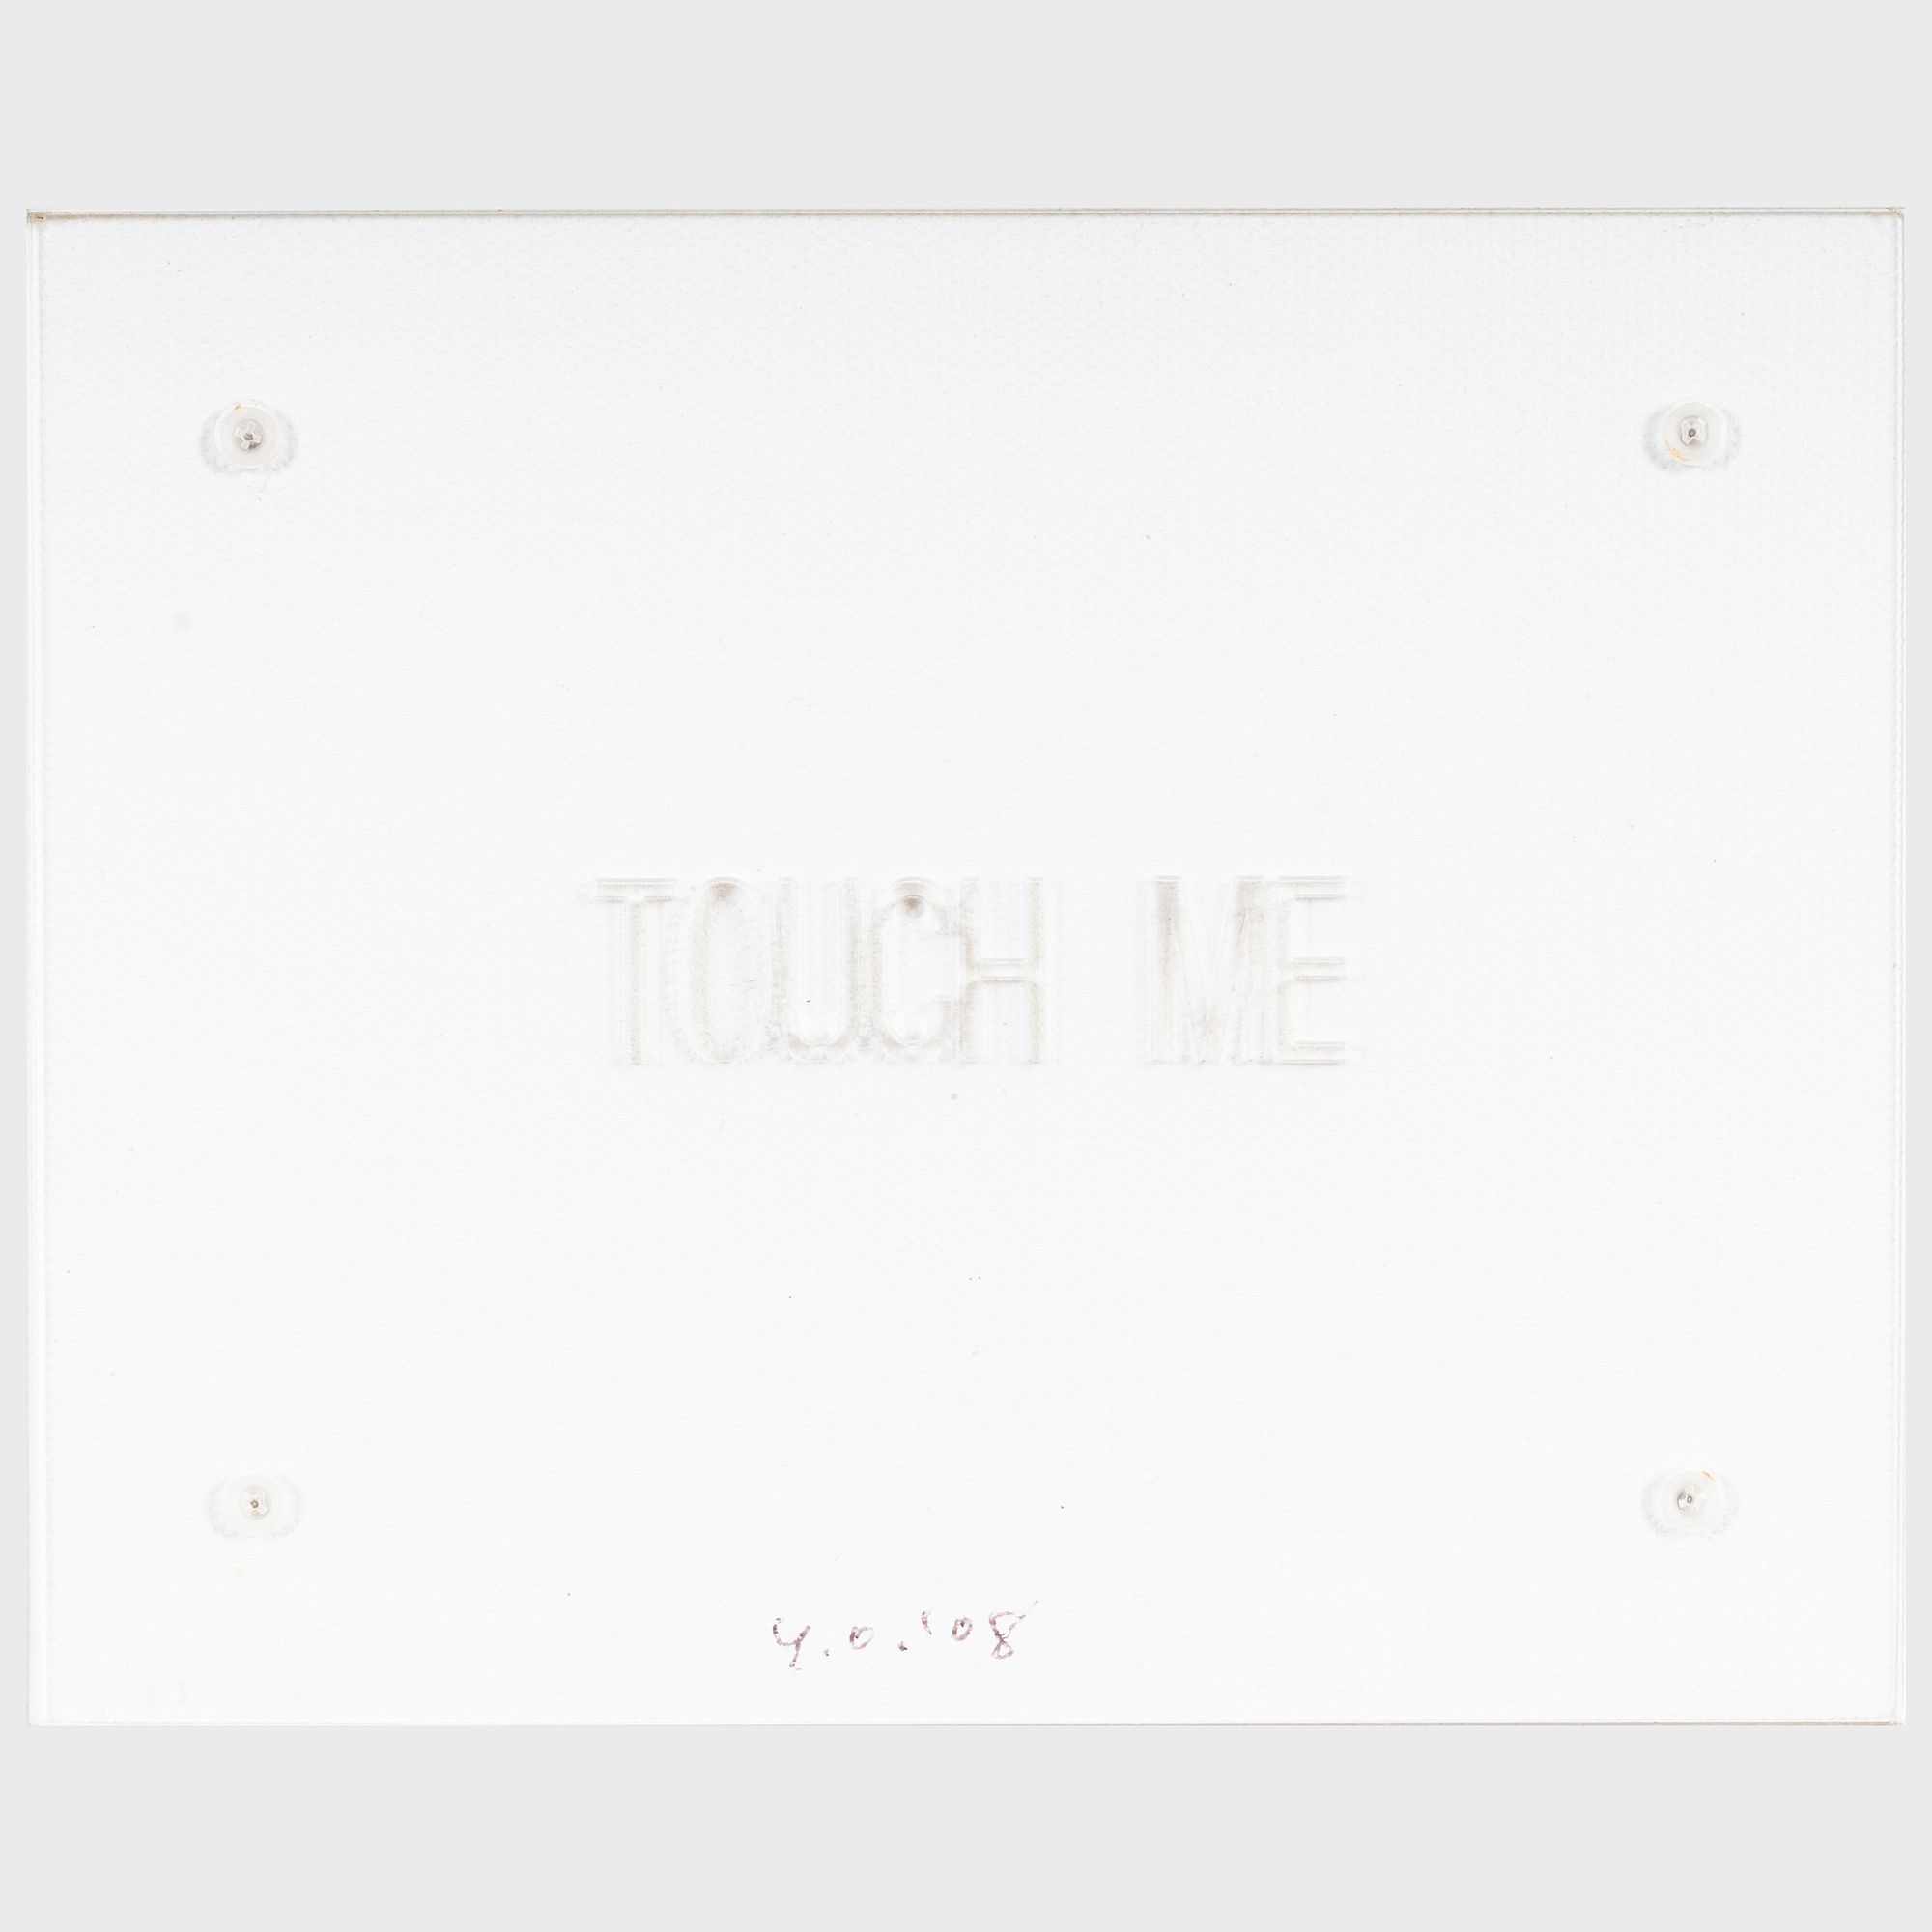 Touch Me by Yoko Ono, 2008